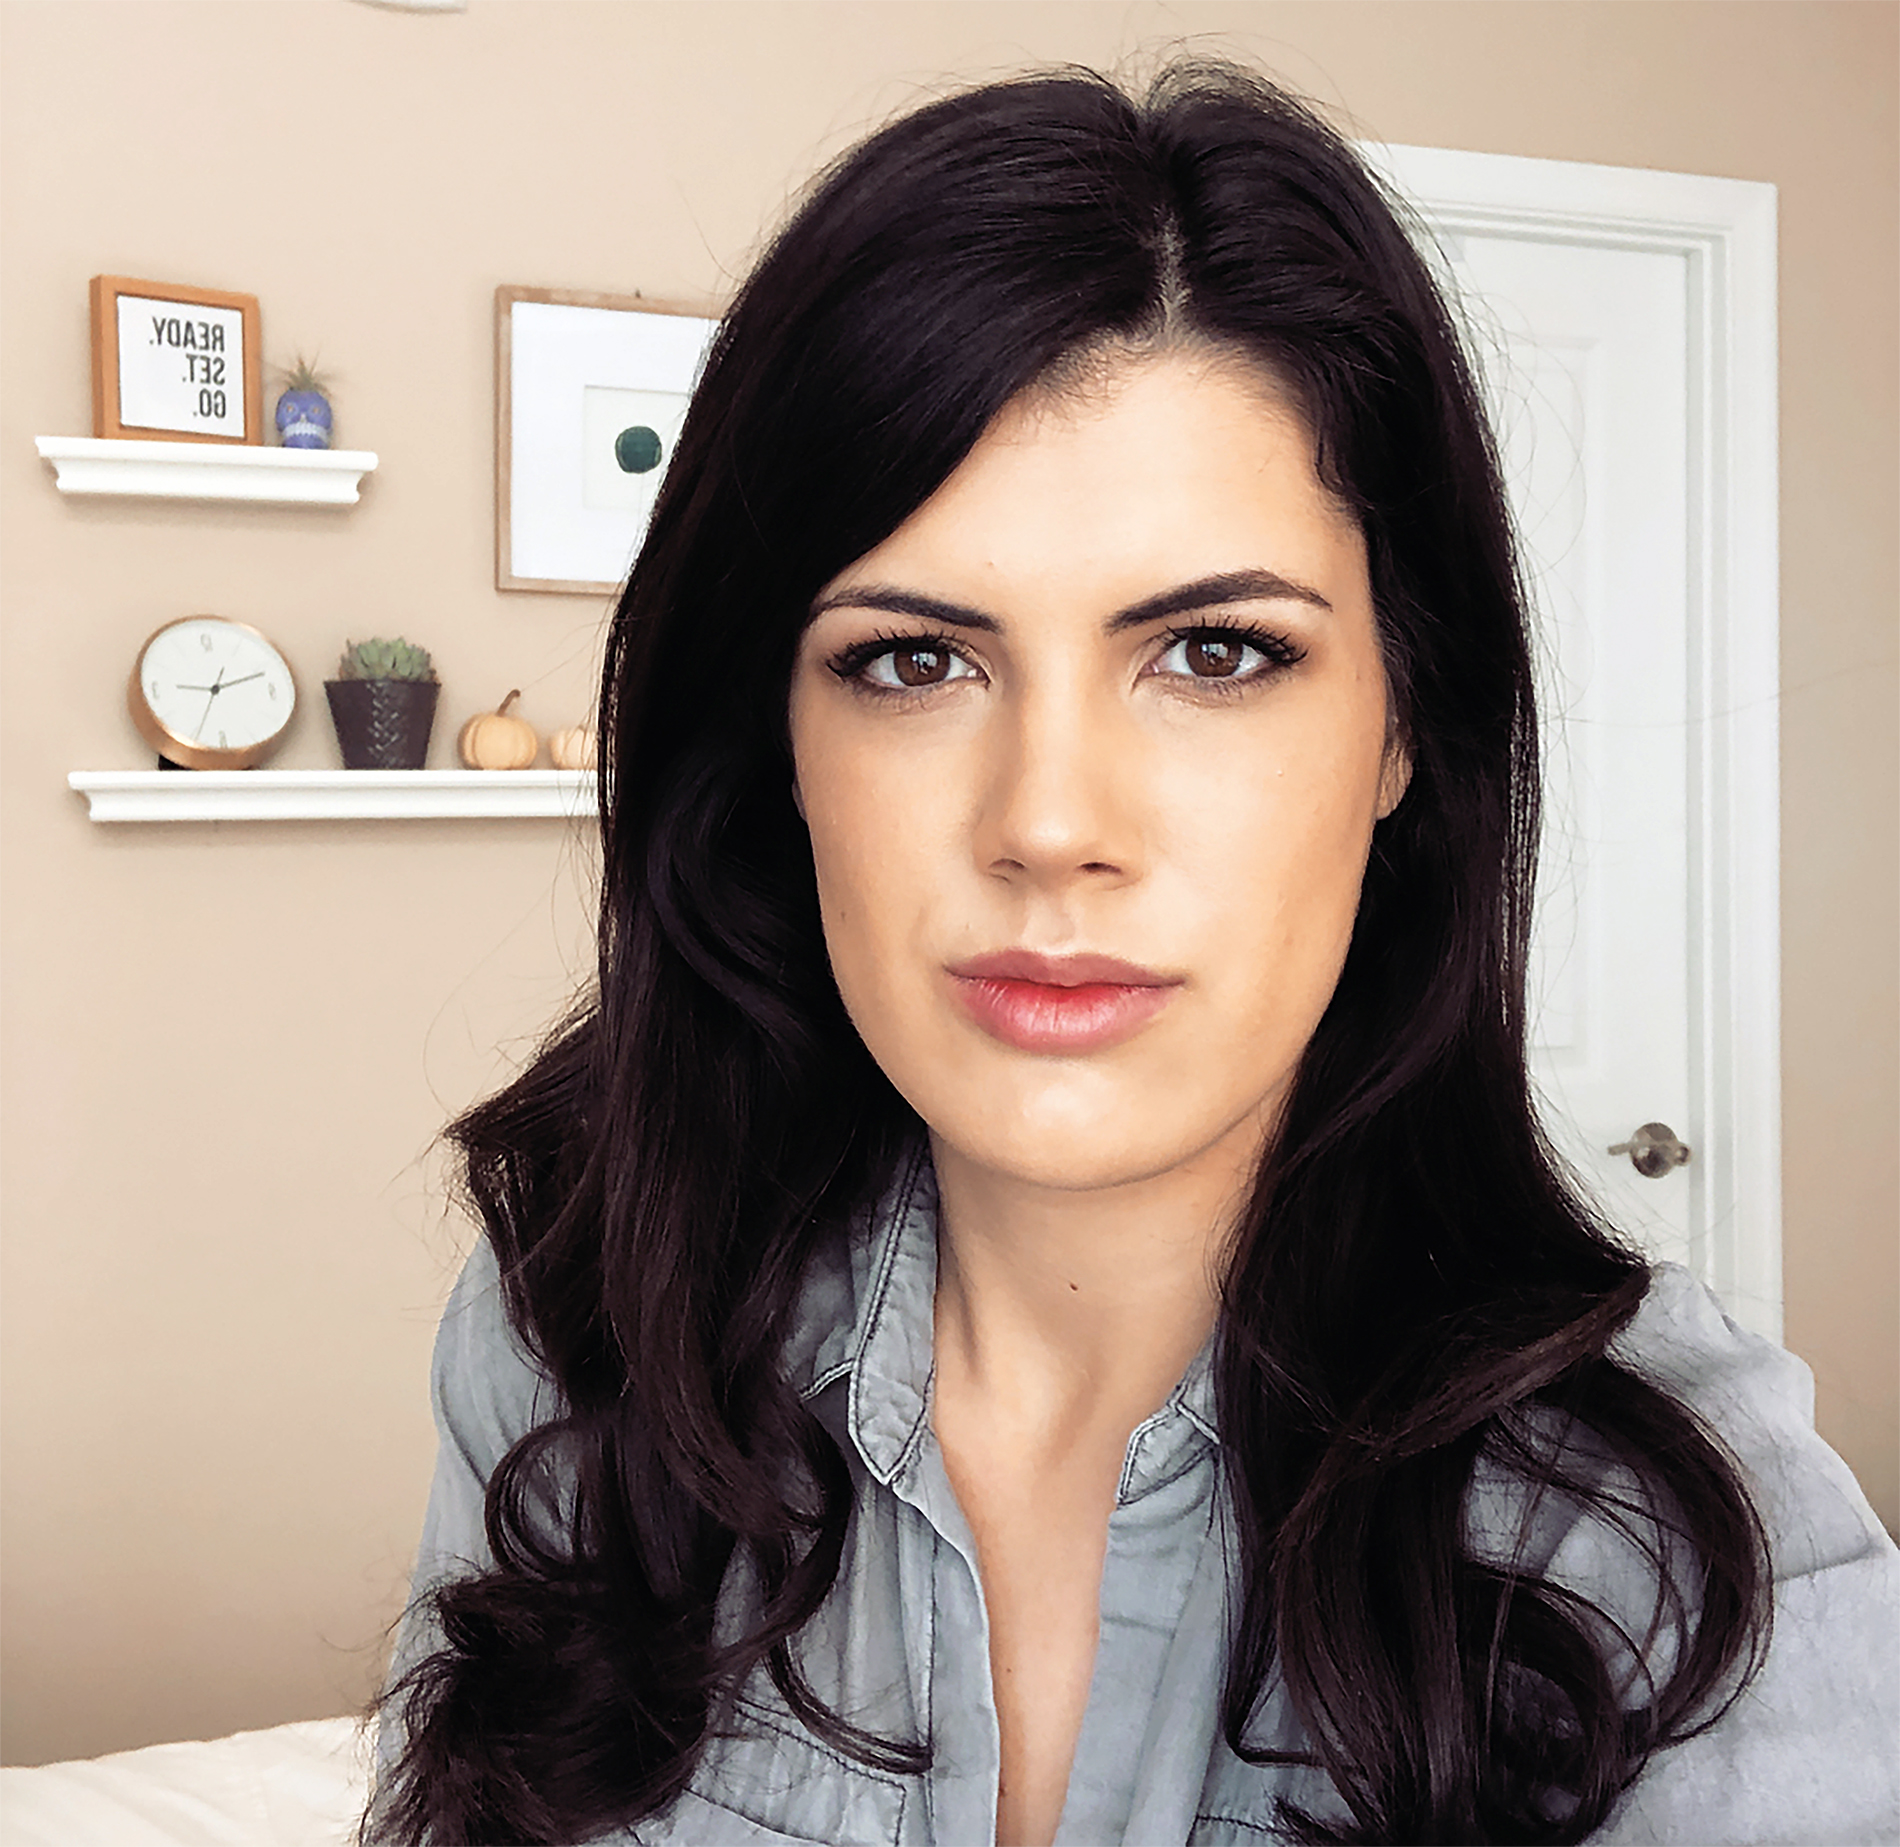 Remembering Bre Payton, a Clarion family member